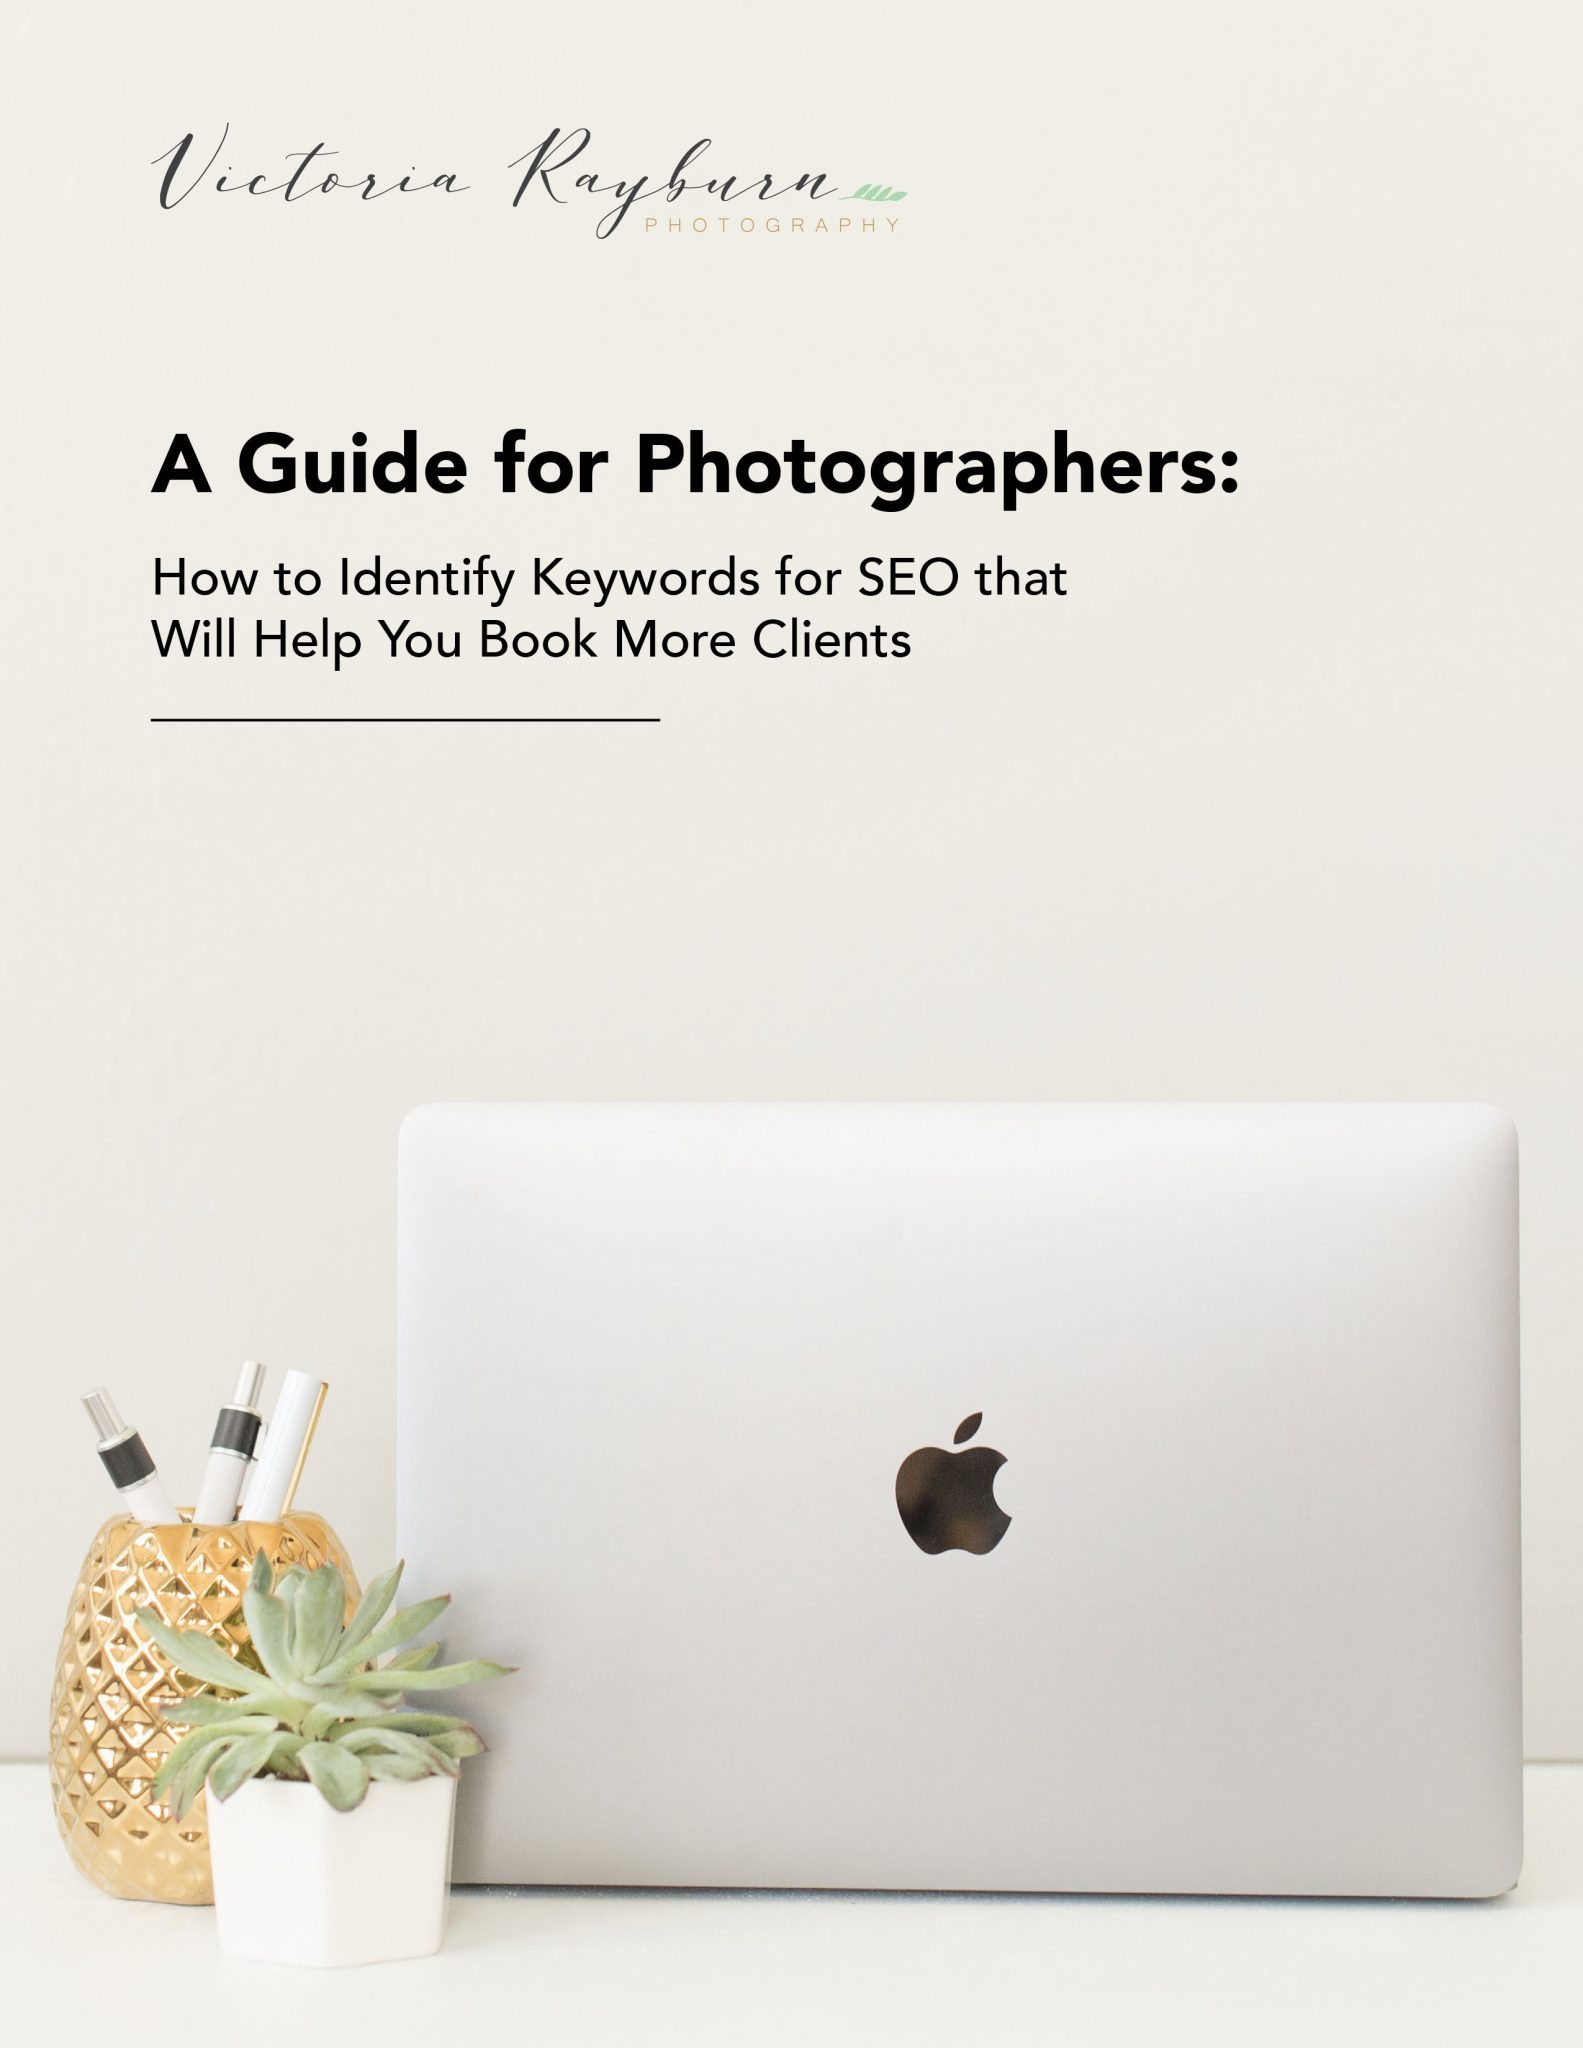 For Photographers and Entrepreneurs